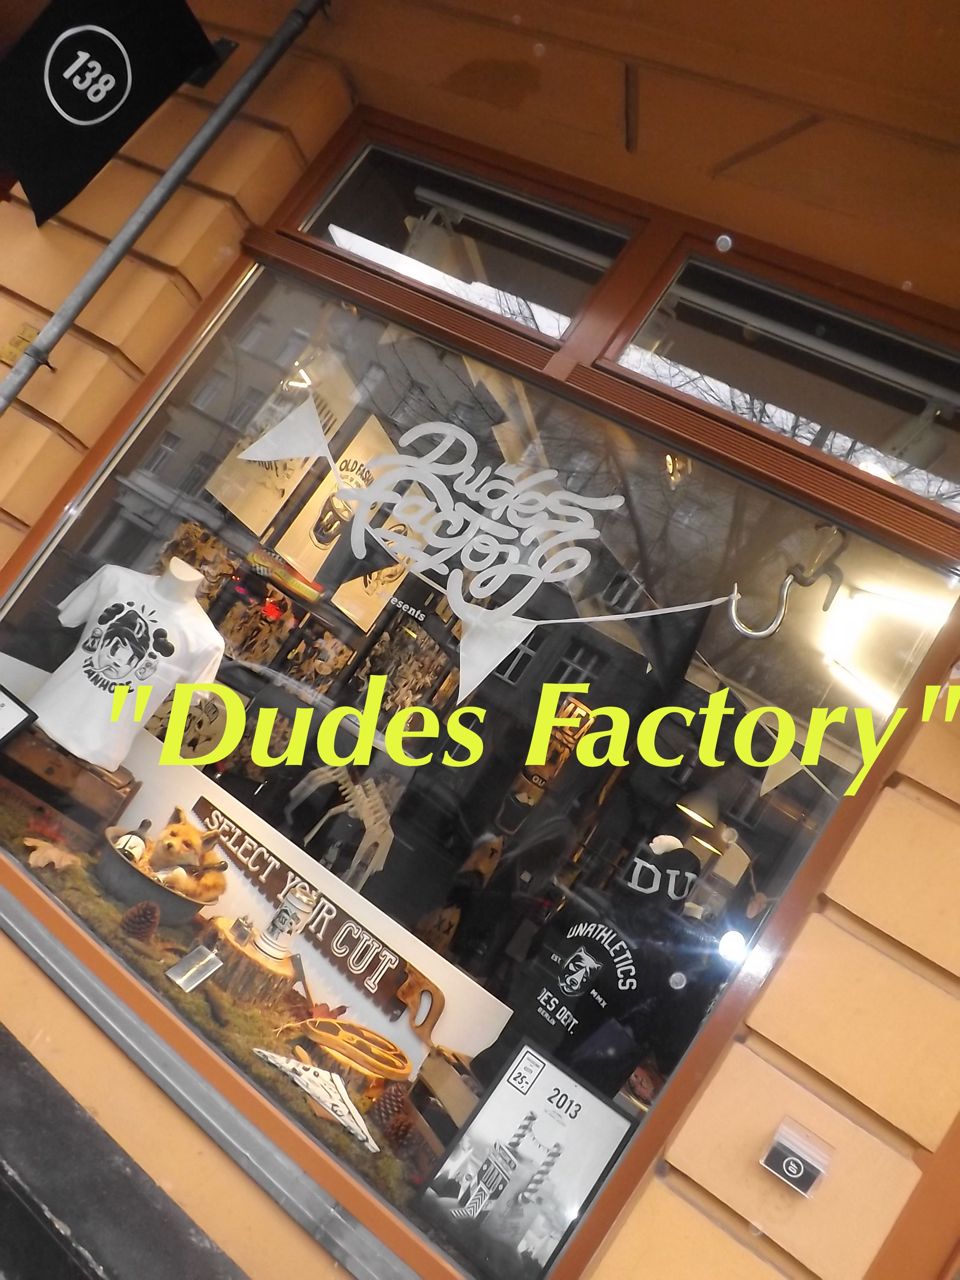 <!--:en-->Dudes Factory!!!The Eclectic Multi Brand shop for Guys and their Babes!!!!<!--:-->